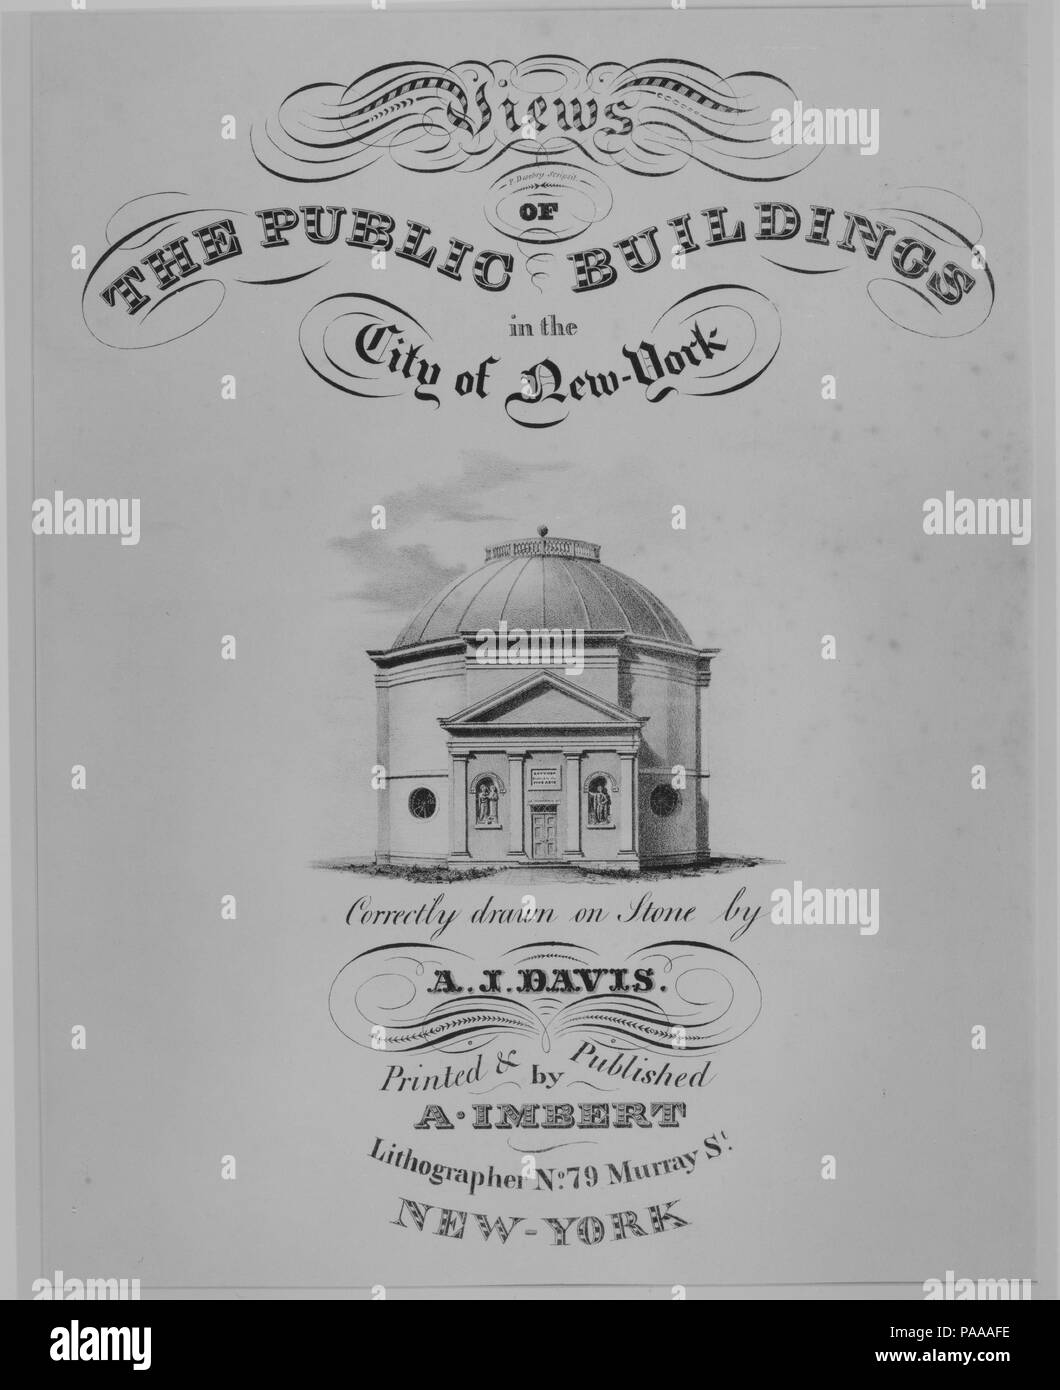 Frontispiece to Views of the Public Buildings in the City of New York (Rotunda, Corner of Chambers and Cross Streets). Artist: After Alexander Jackson Davis (American, New York 1803-1892 West Orange, New Jersey); Design attributed to John Vanderlyn (American, Kingston, New York 1775-1852 Kingston, New York). Dimensions: sheet: 19 5/8 x 15 1/16 in. (49.9 x 38.3 cm). Lithographer: Anthony Imbert (American, born France, active New York 1825-ca. 1838). Date: 1827. Museum: Metropolitan Museum of Art, New York, USA. Stock Photo